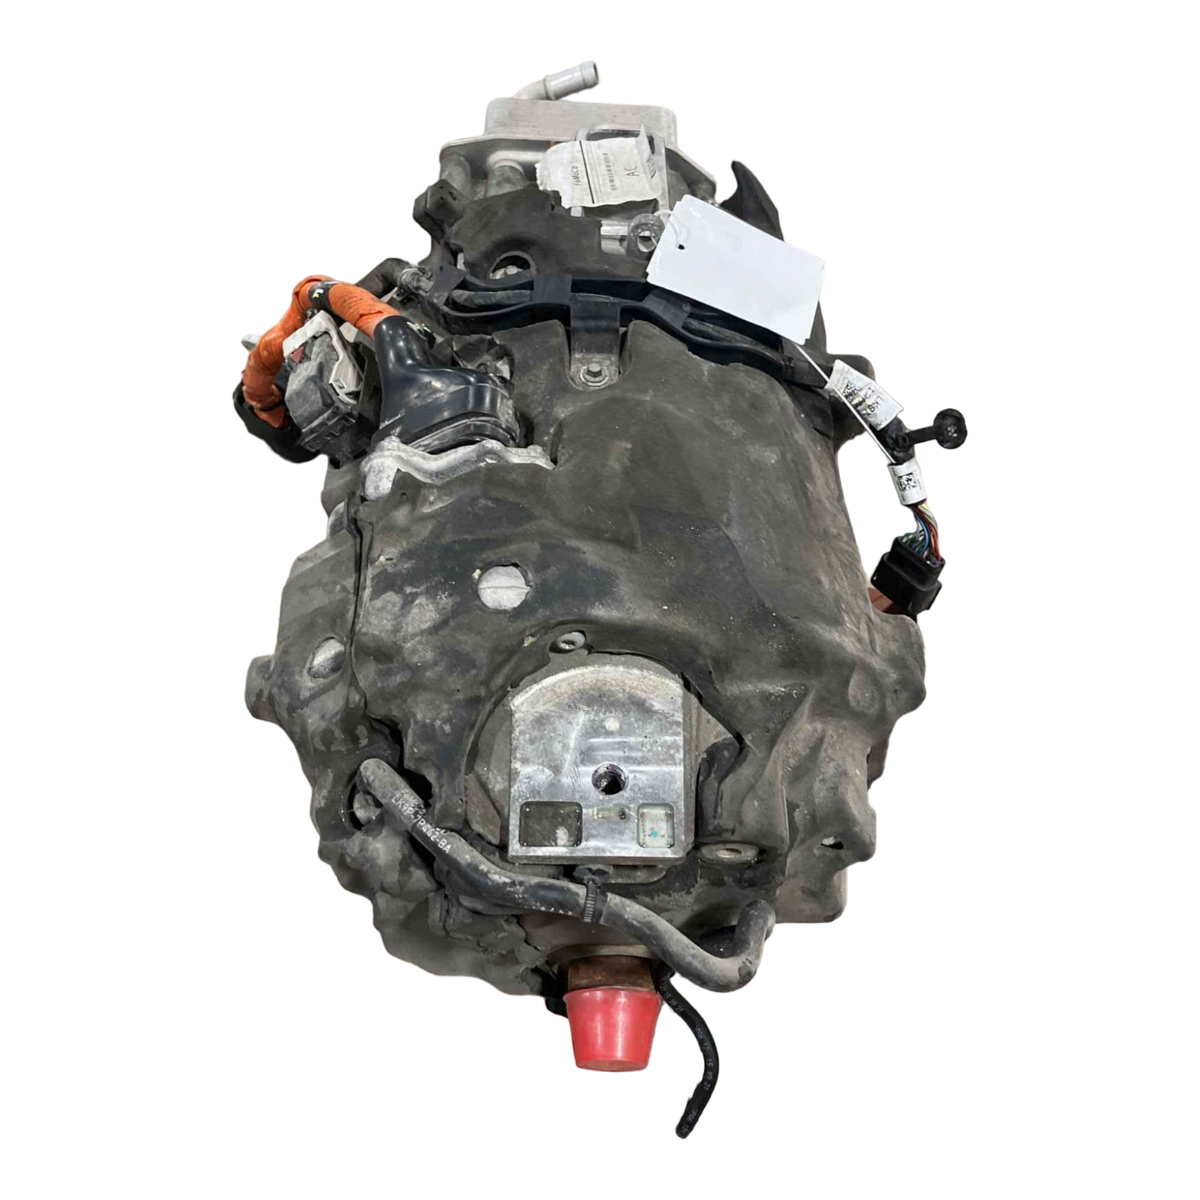 FORD MUSTANG MACH-E  DRIVE MOTOR, FRONT LK98-14B245